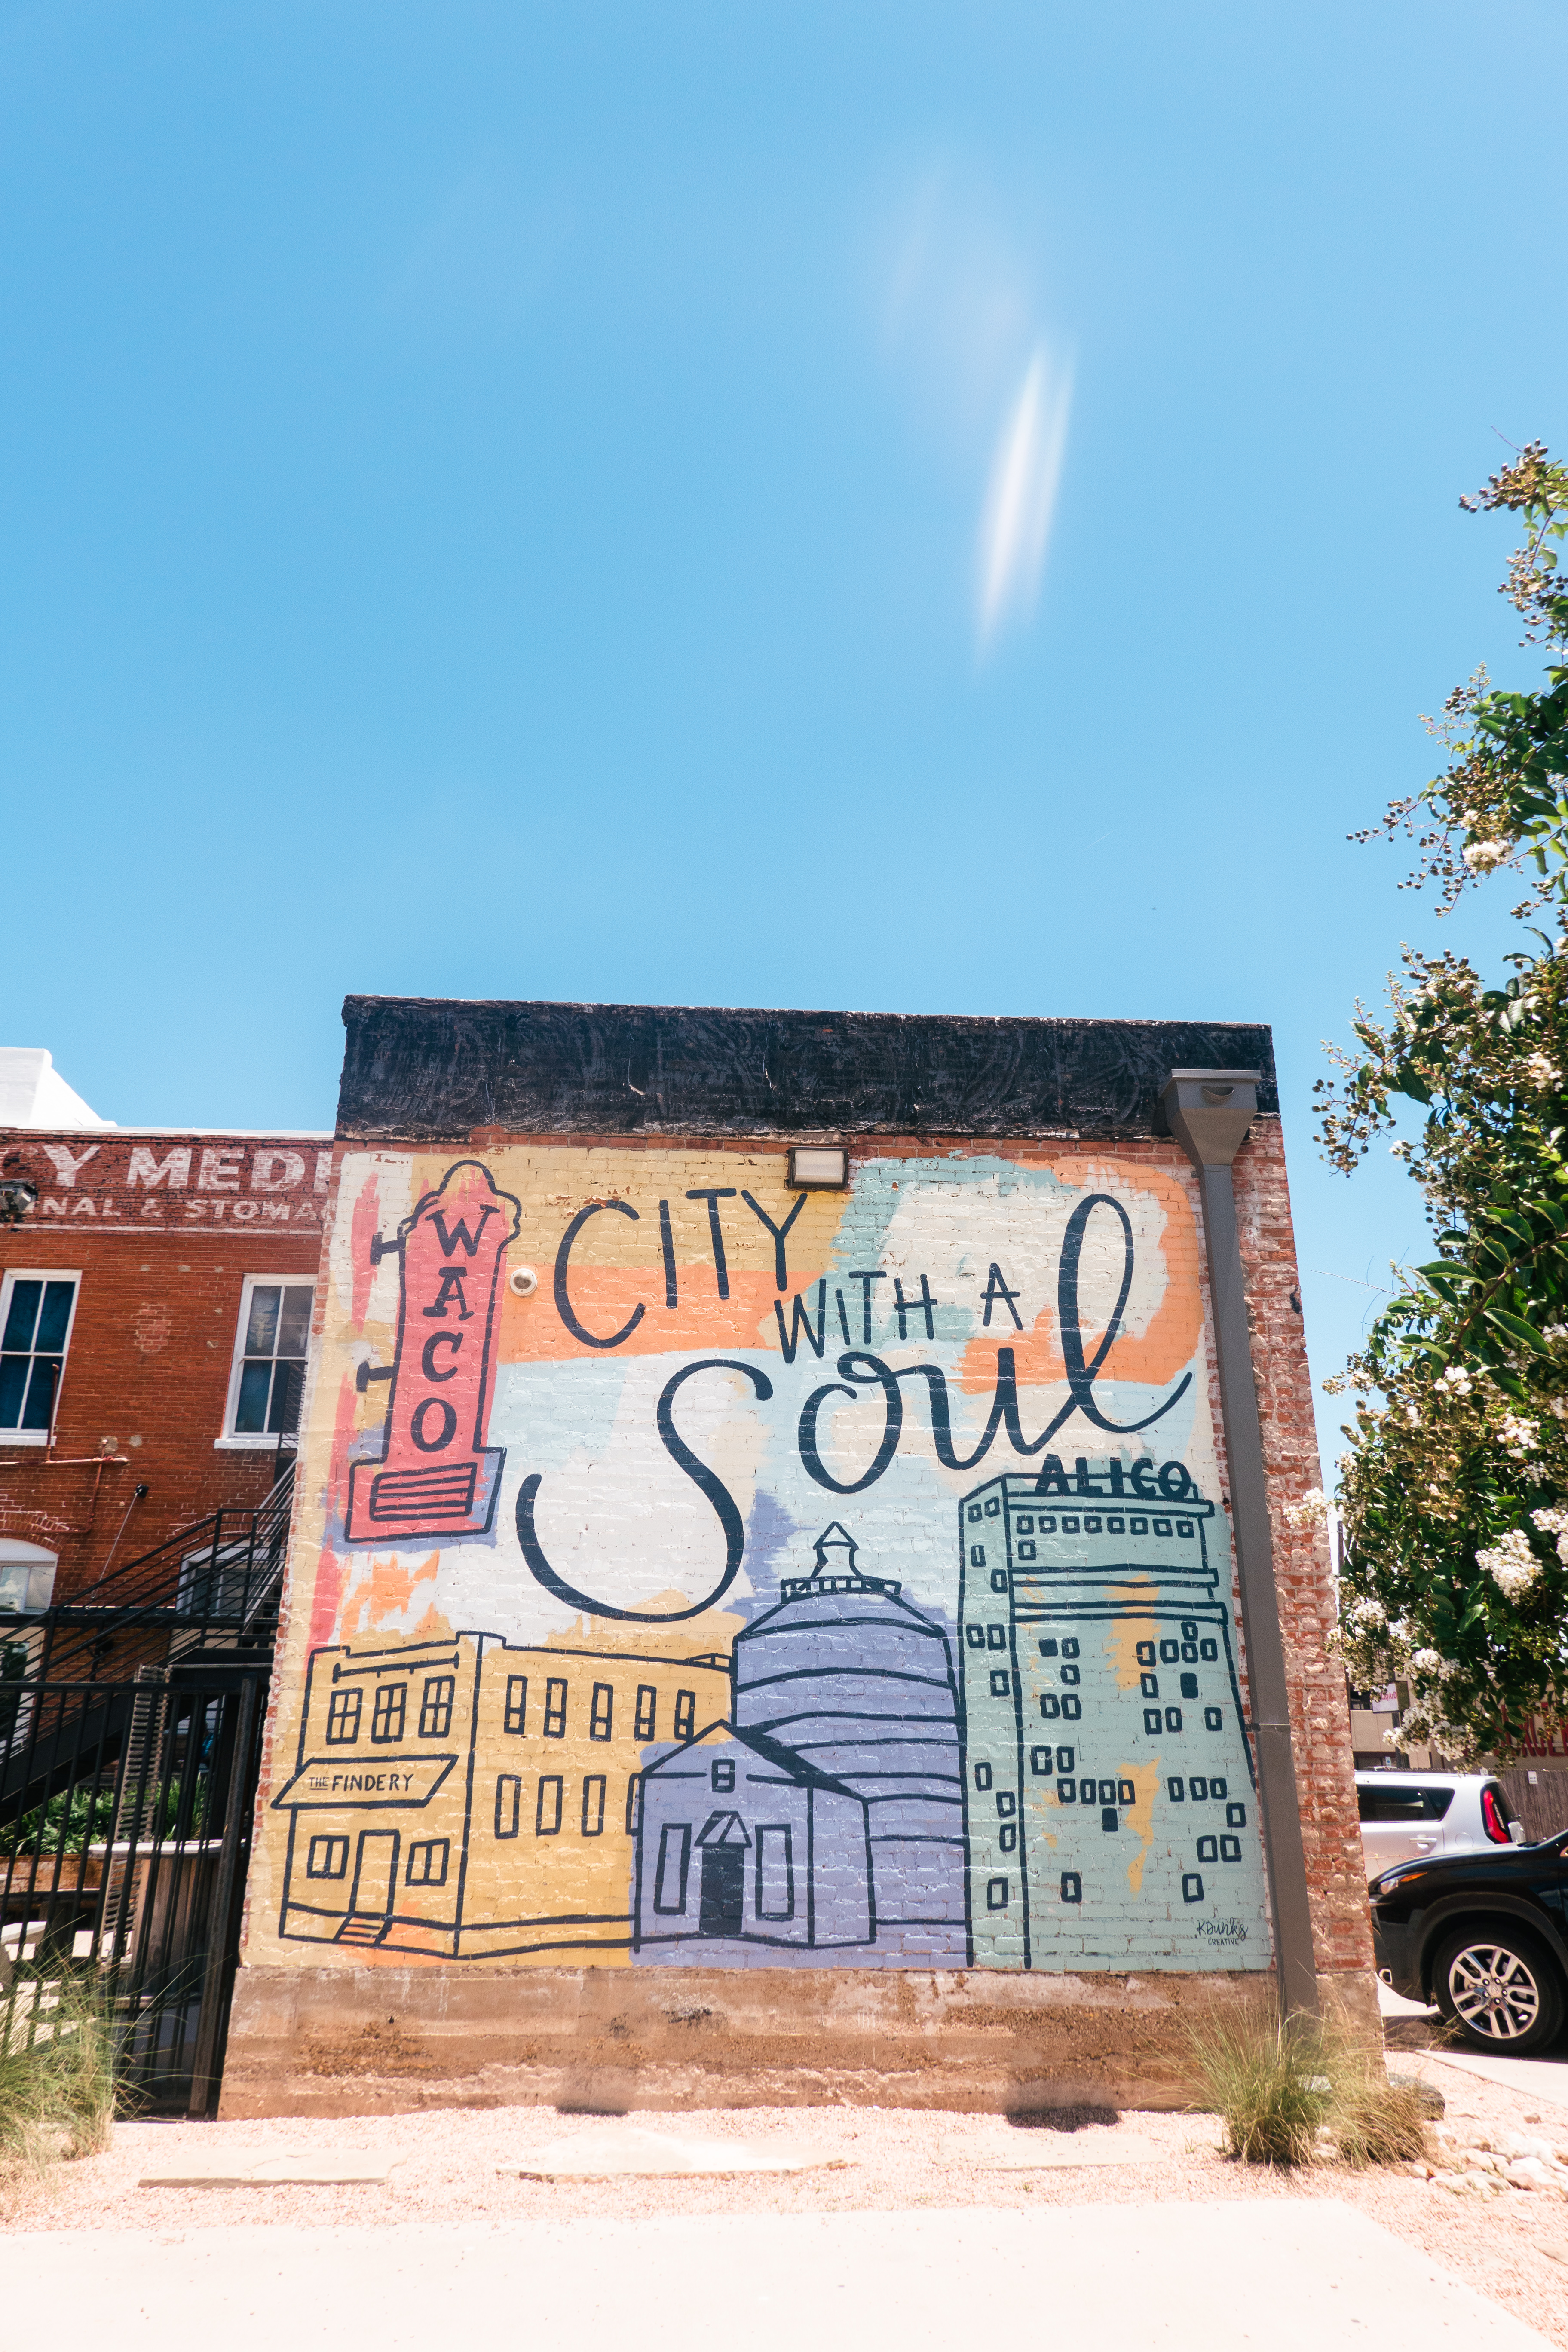 City with a Soul mural in Waco, Texas